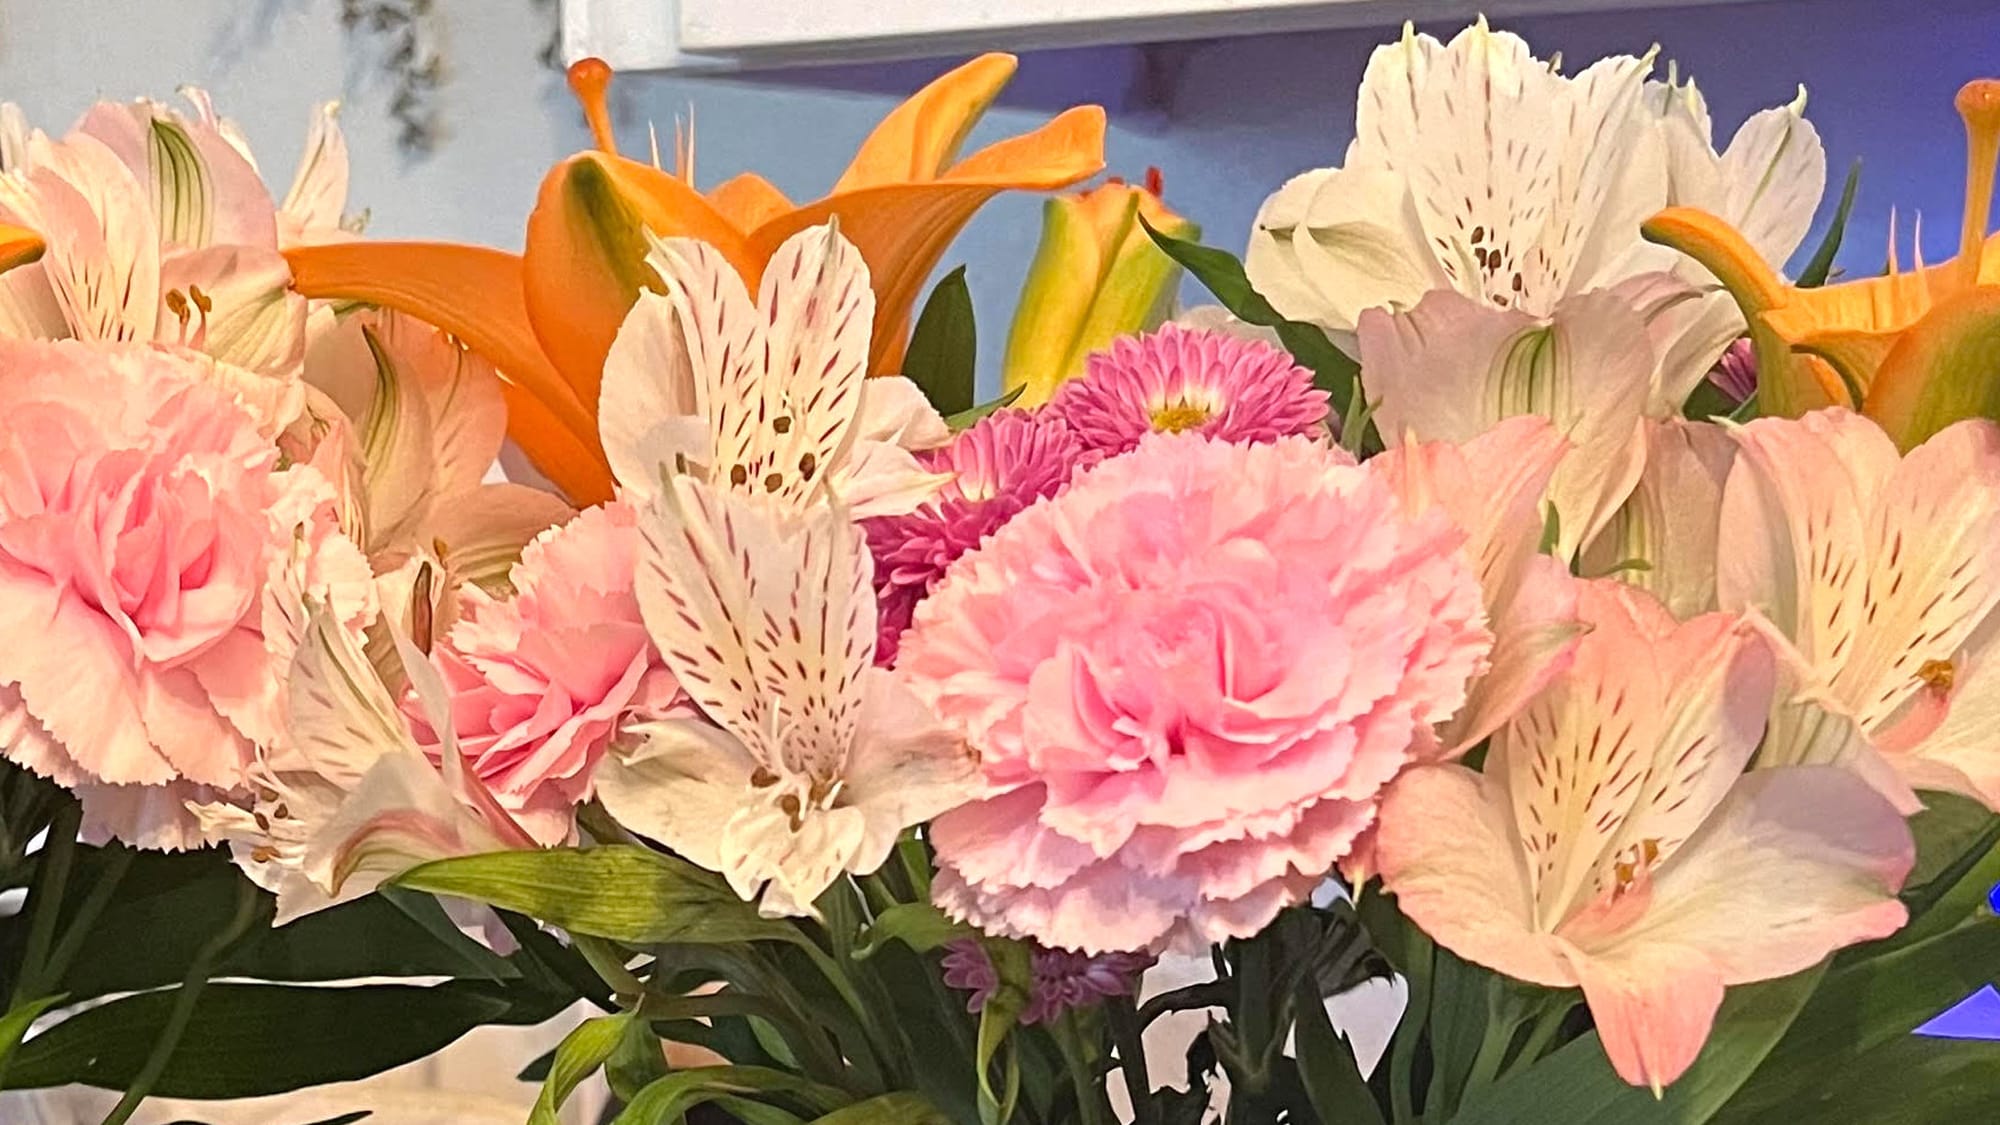 Closeup of a riotously colorful flower arrangement featuring alstroemeria, pink carnations and tiger lilies